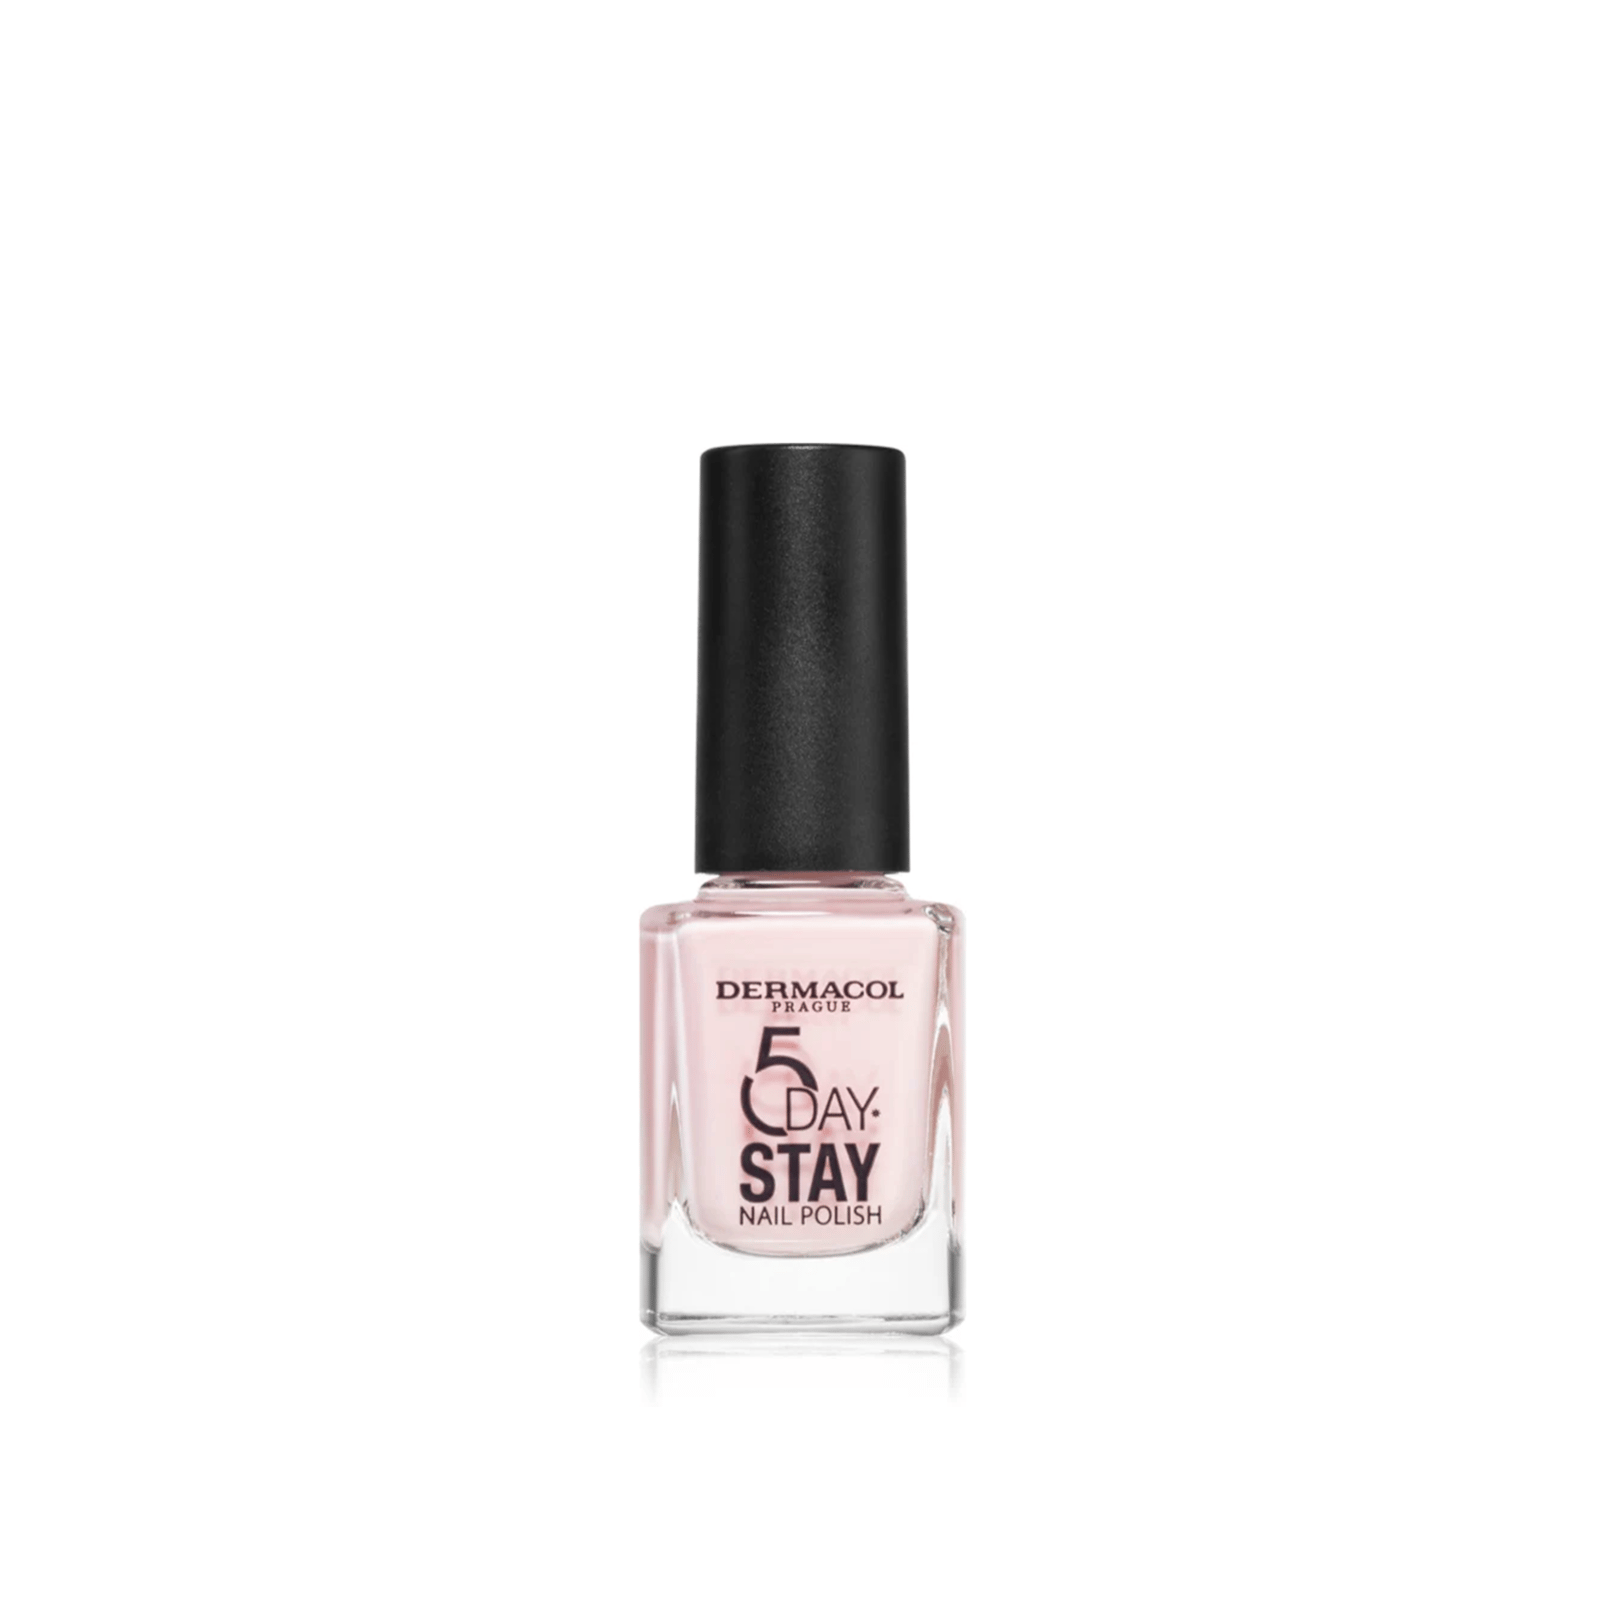 Dermacol 5 Day Stay Nail Polish 06 First Kiss 11ml